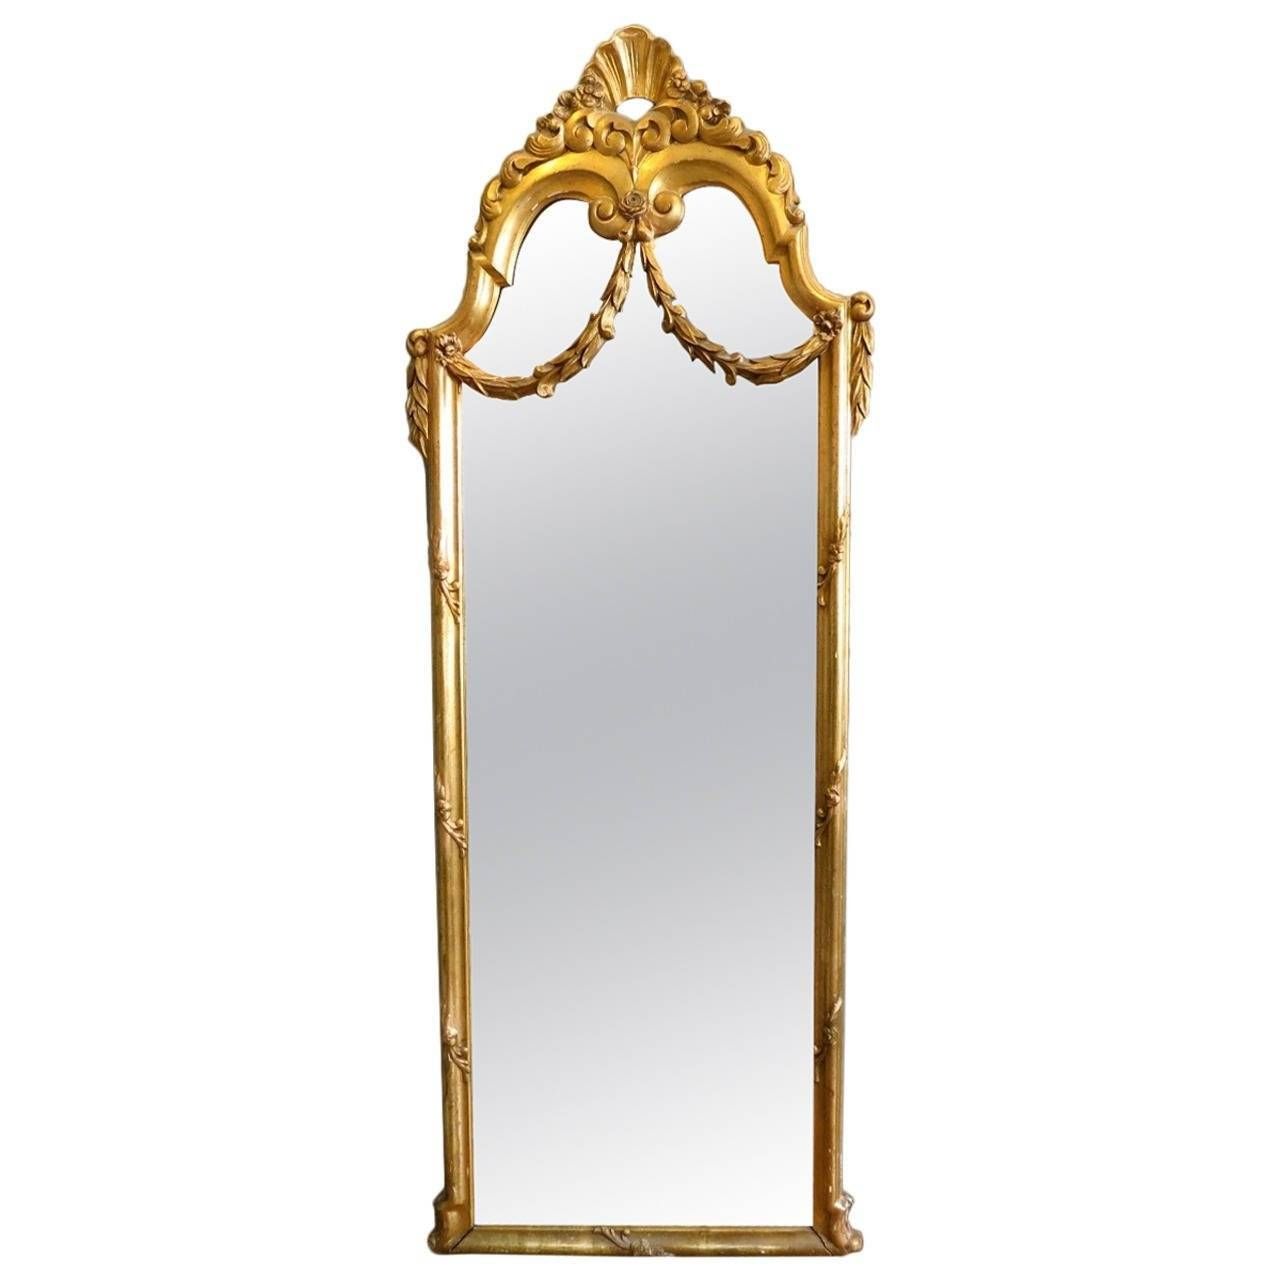 Antique French Gold Gilt Floor Standing Mirror At 1stdibs Intended For Vintage Standing Mirrors (View 2 of 15)